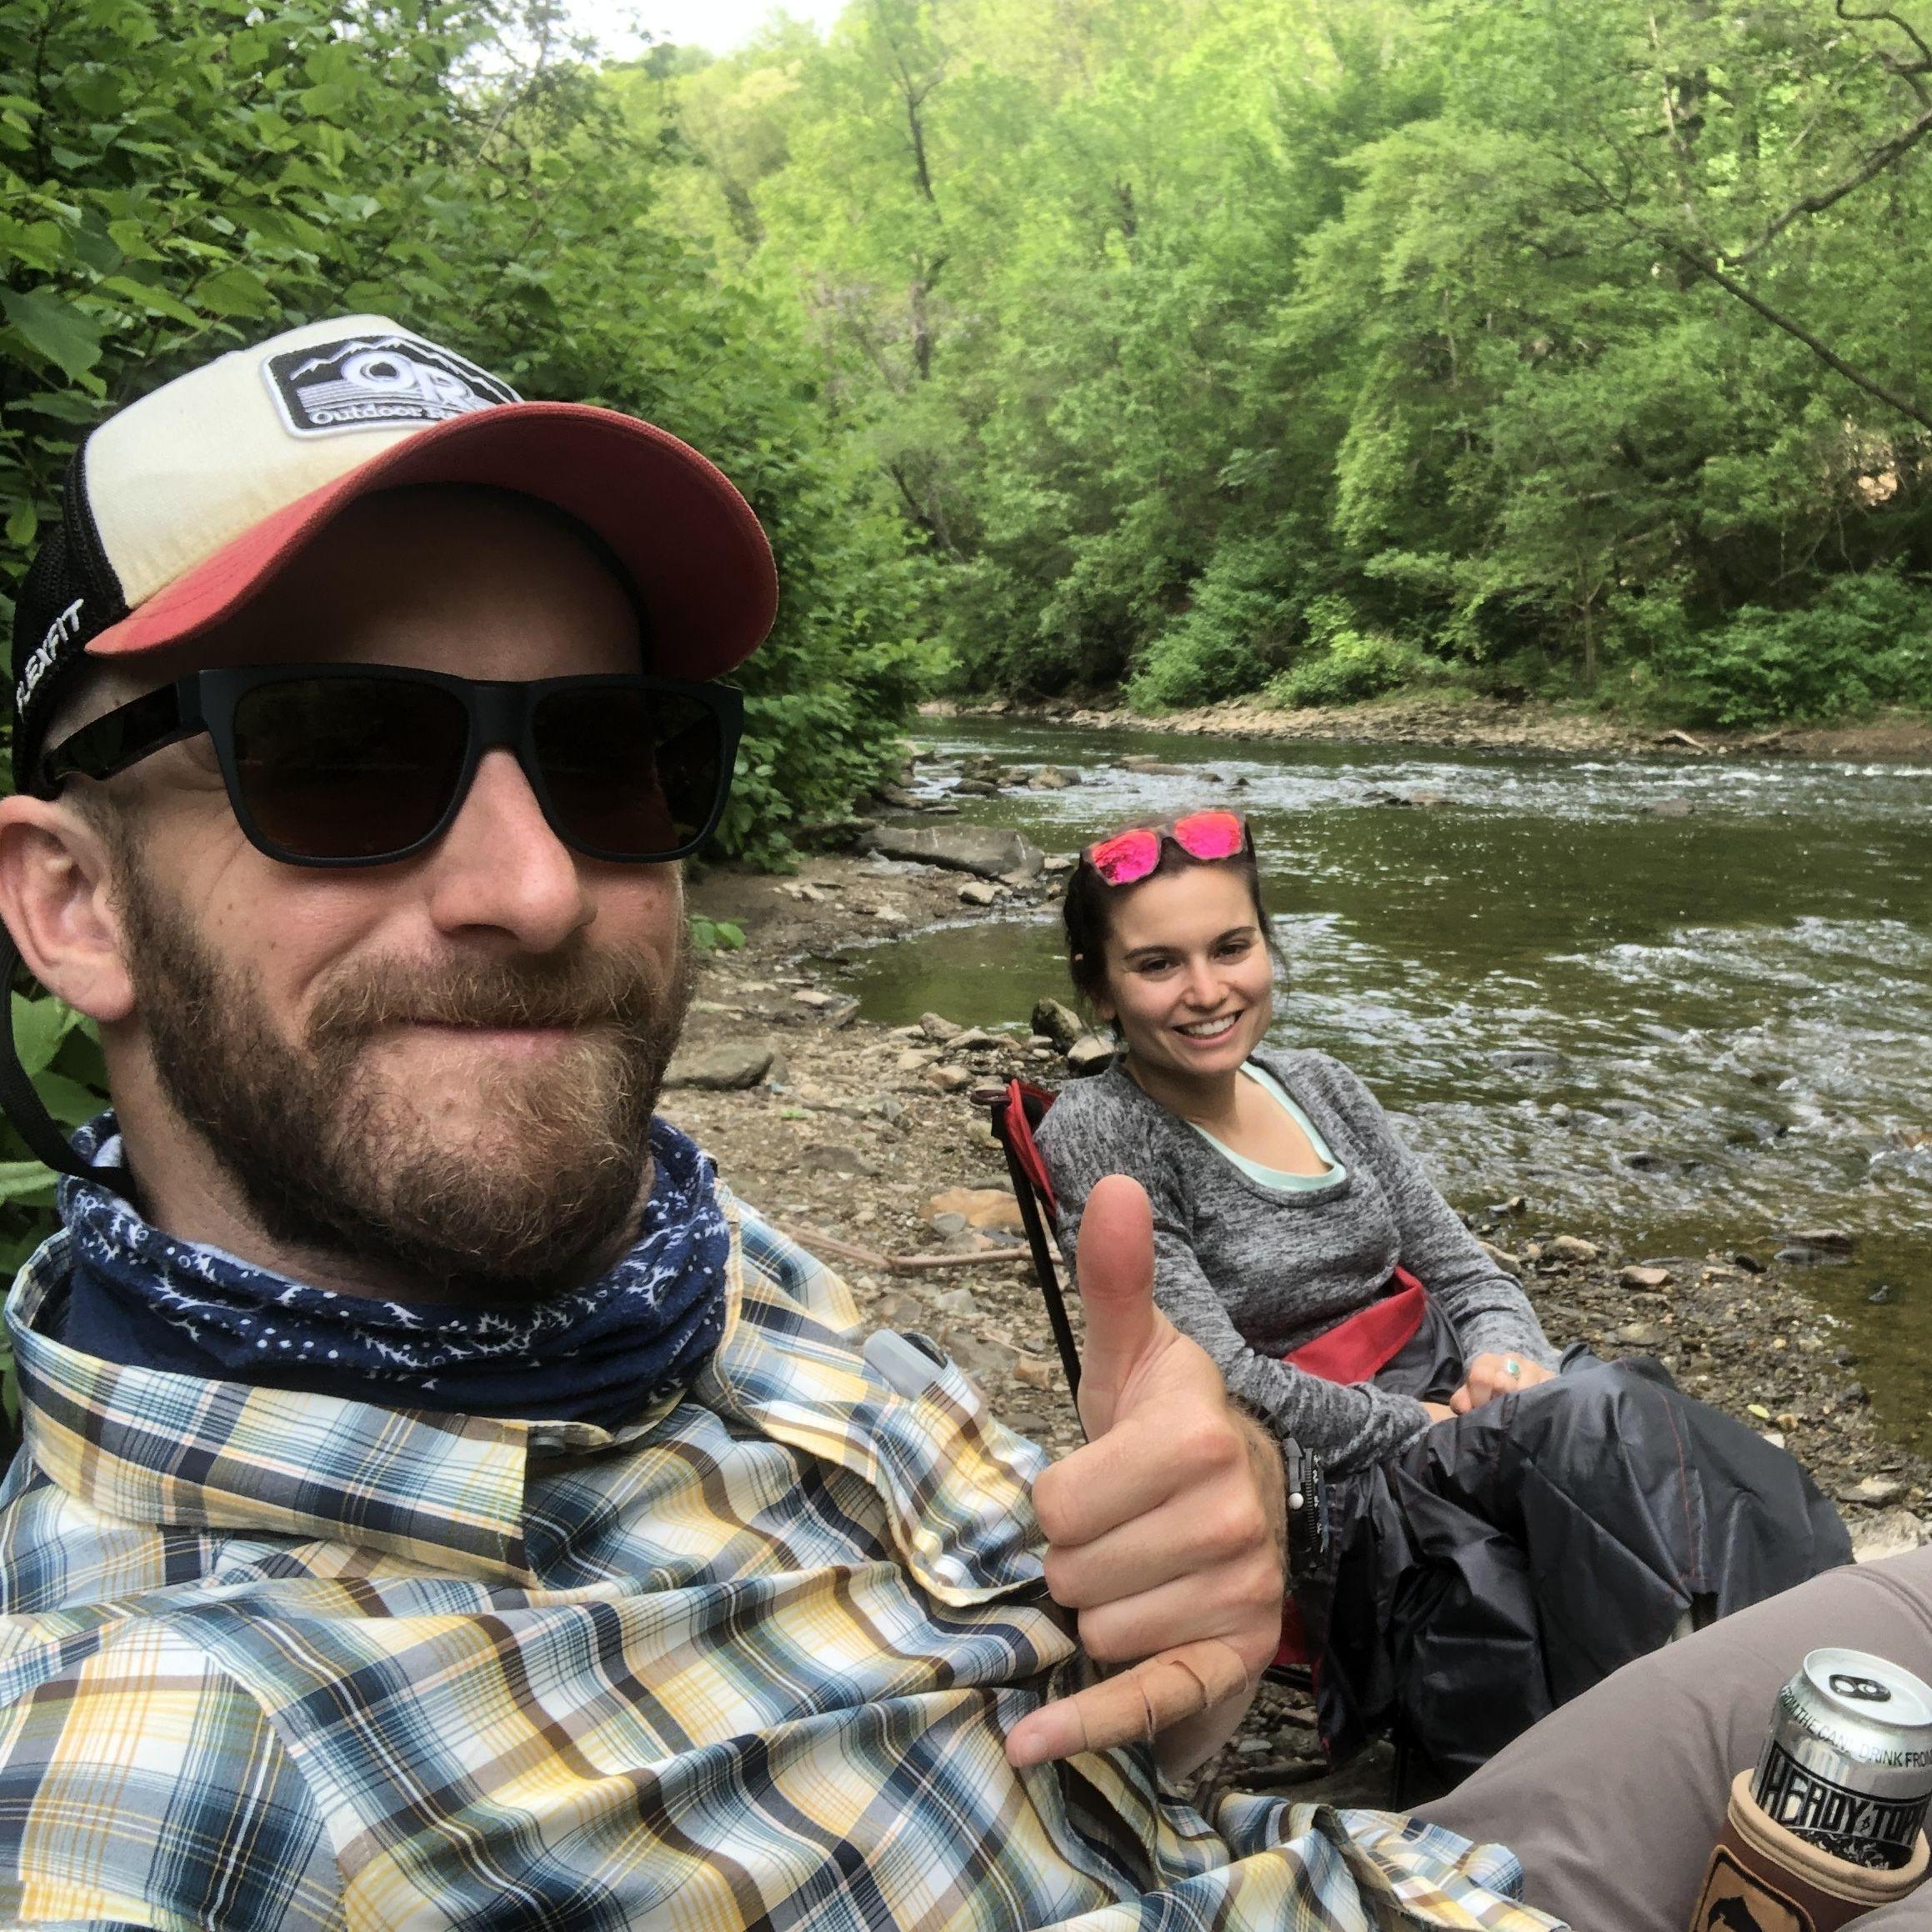 Enjoying the river; Eric about to fish, Emily about to read.